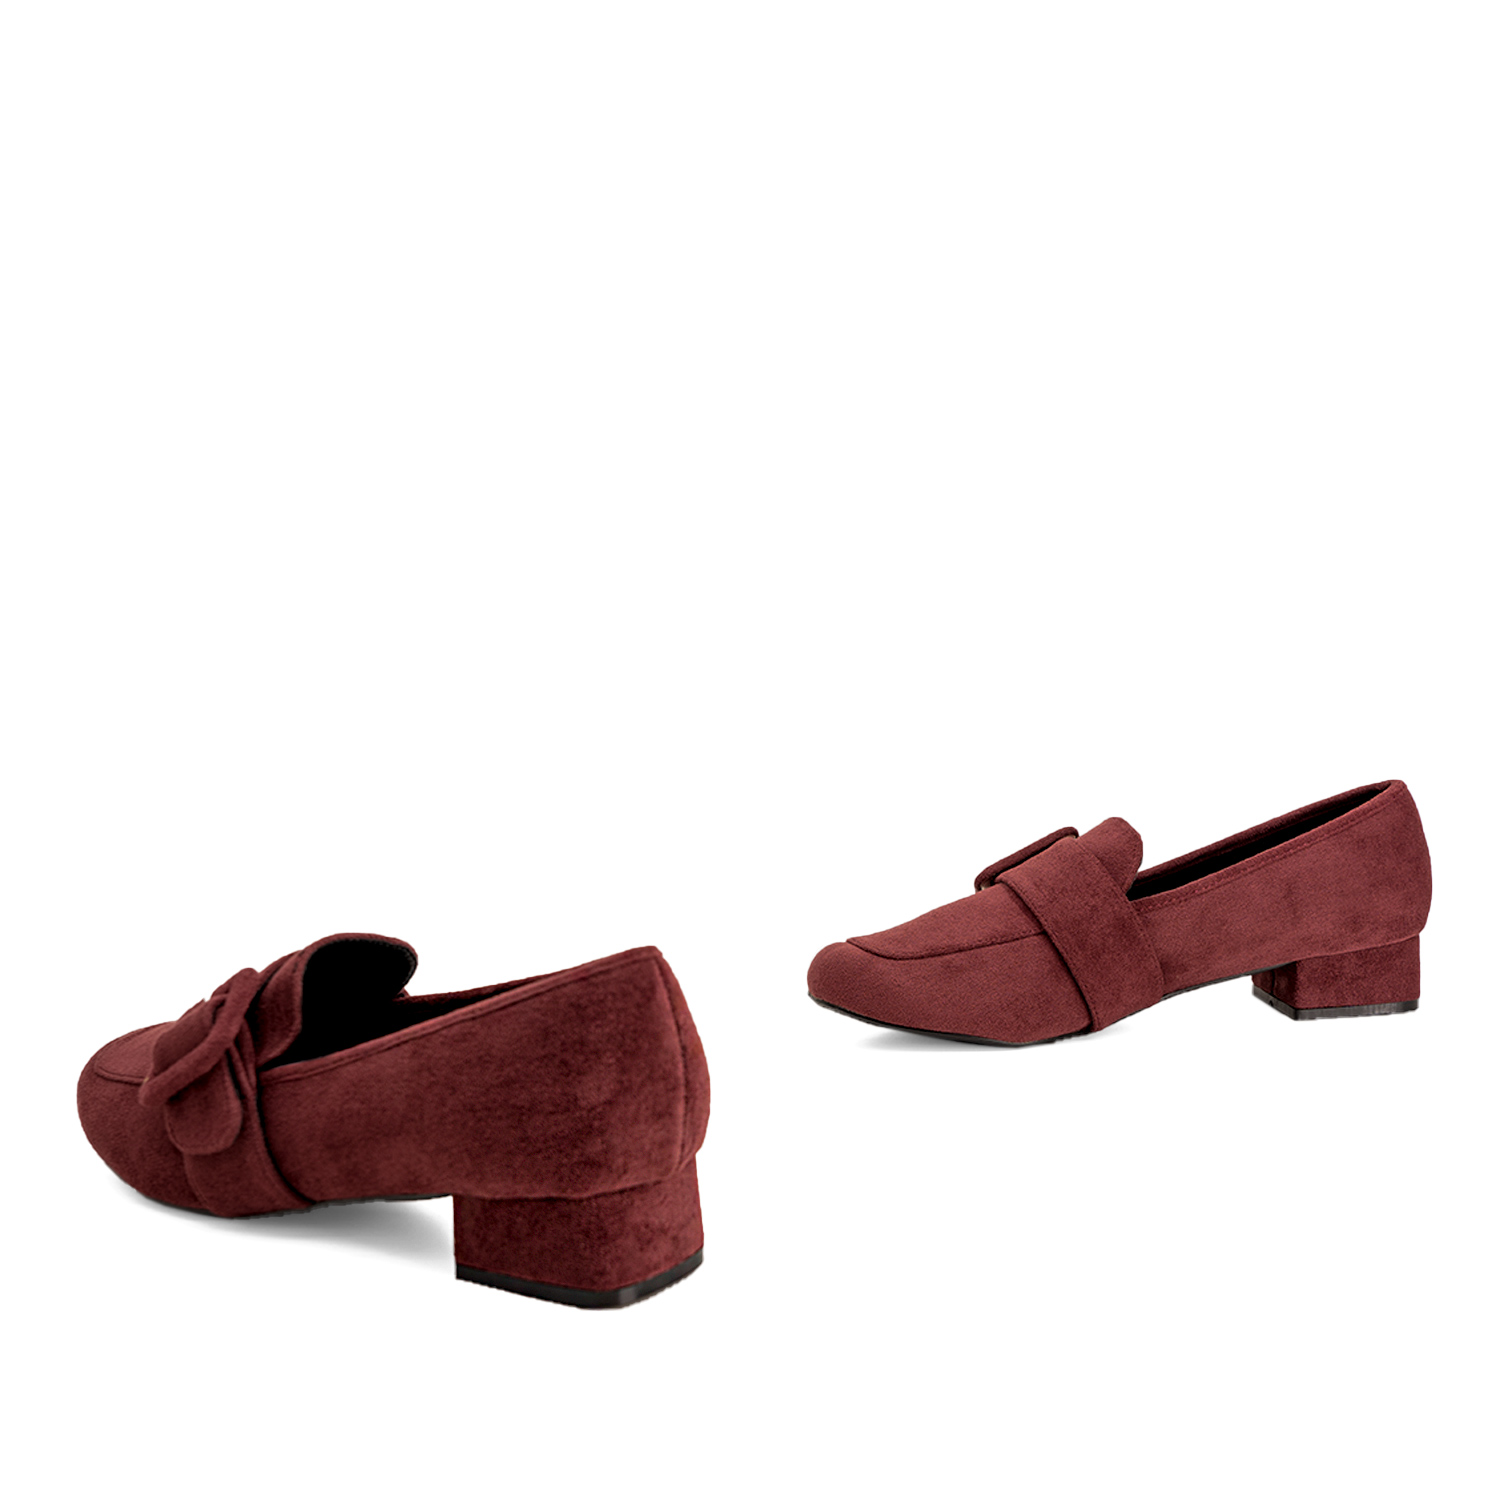 Moccasins in bordeaux faux suede and buckle detail 